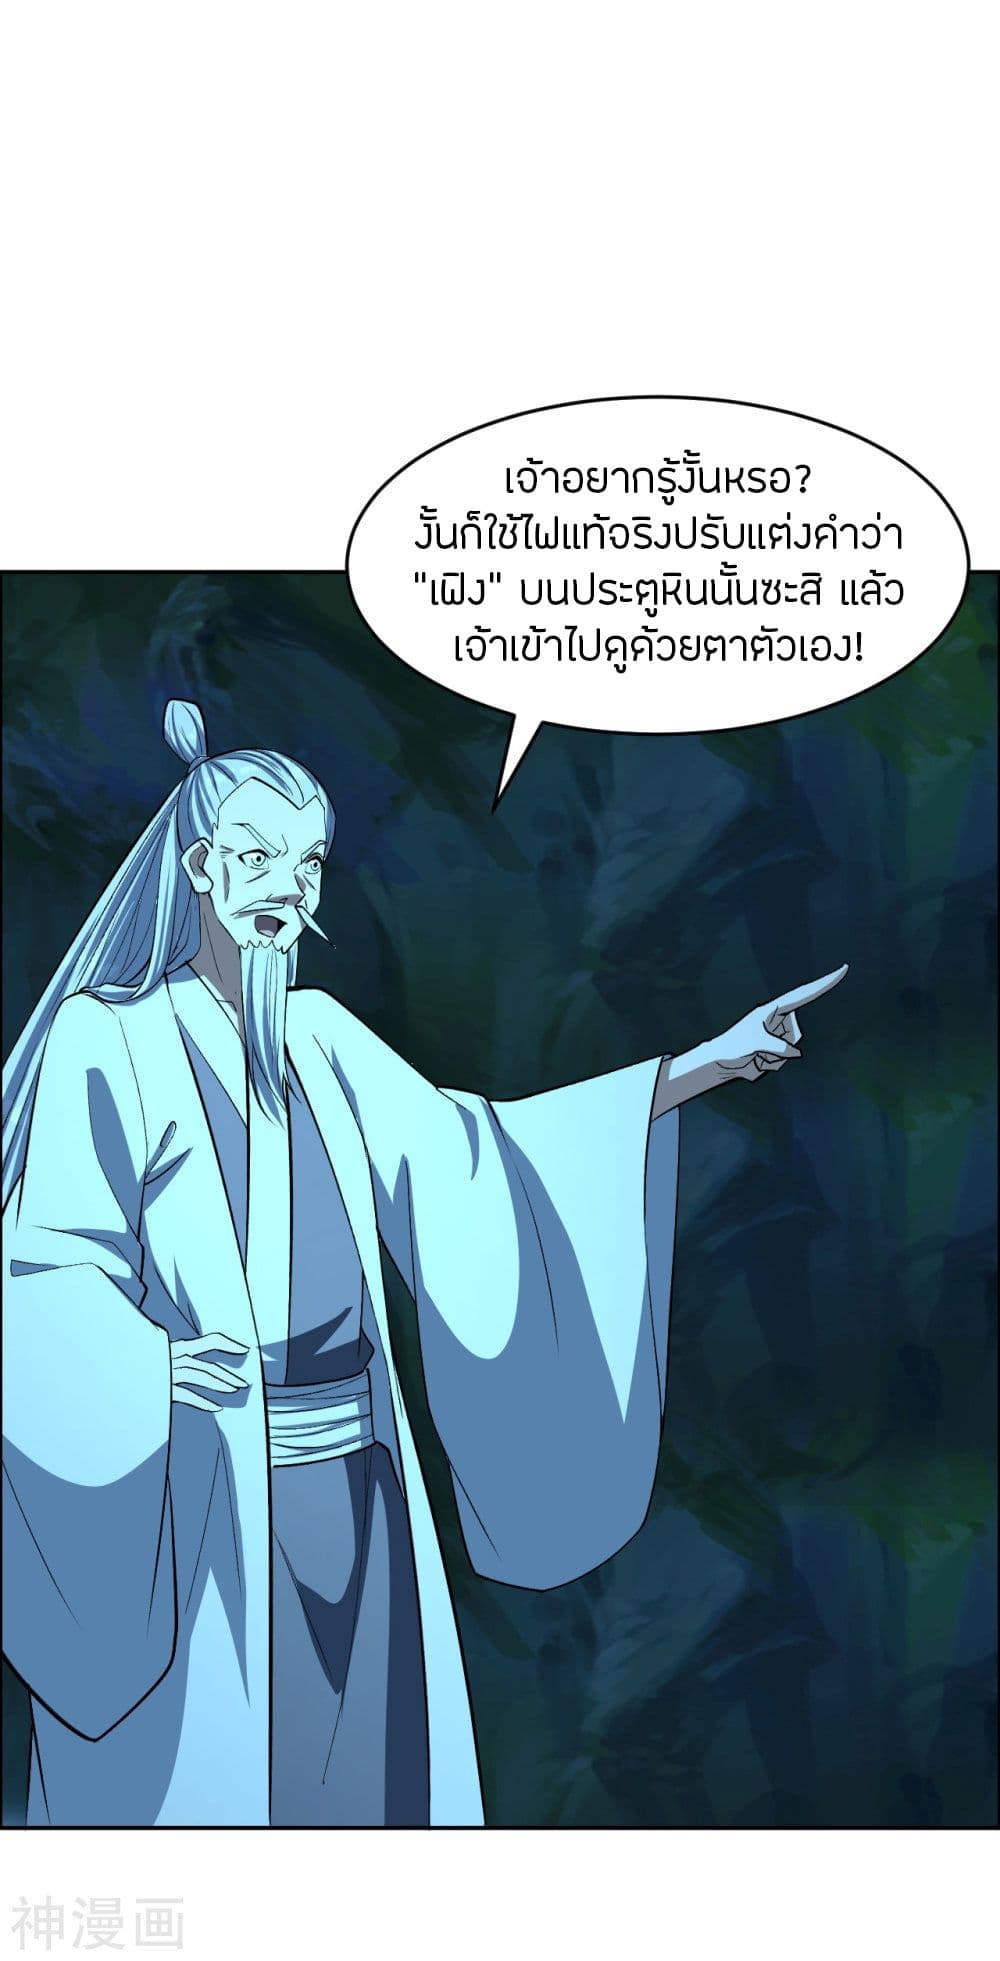 Banished Disciple's Counterattack เธเธฑเธเธฃเธเธฃเธฃเธ”เธดเน€เธเธตเธขเธเธขเธธเธ—เธ 239 (40)